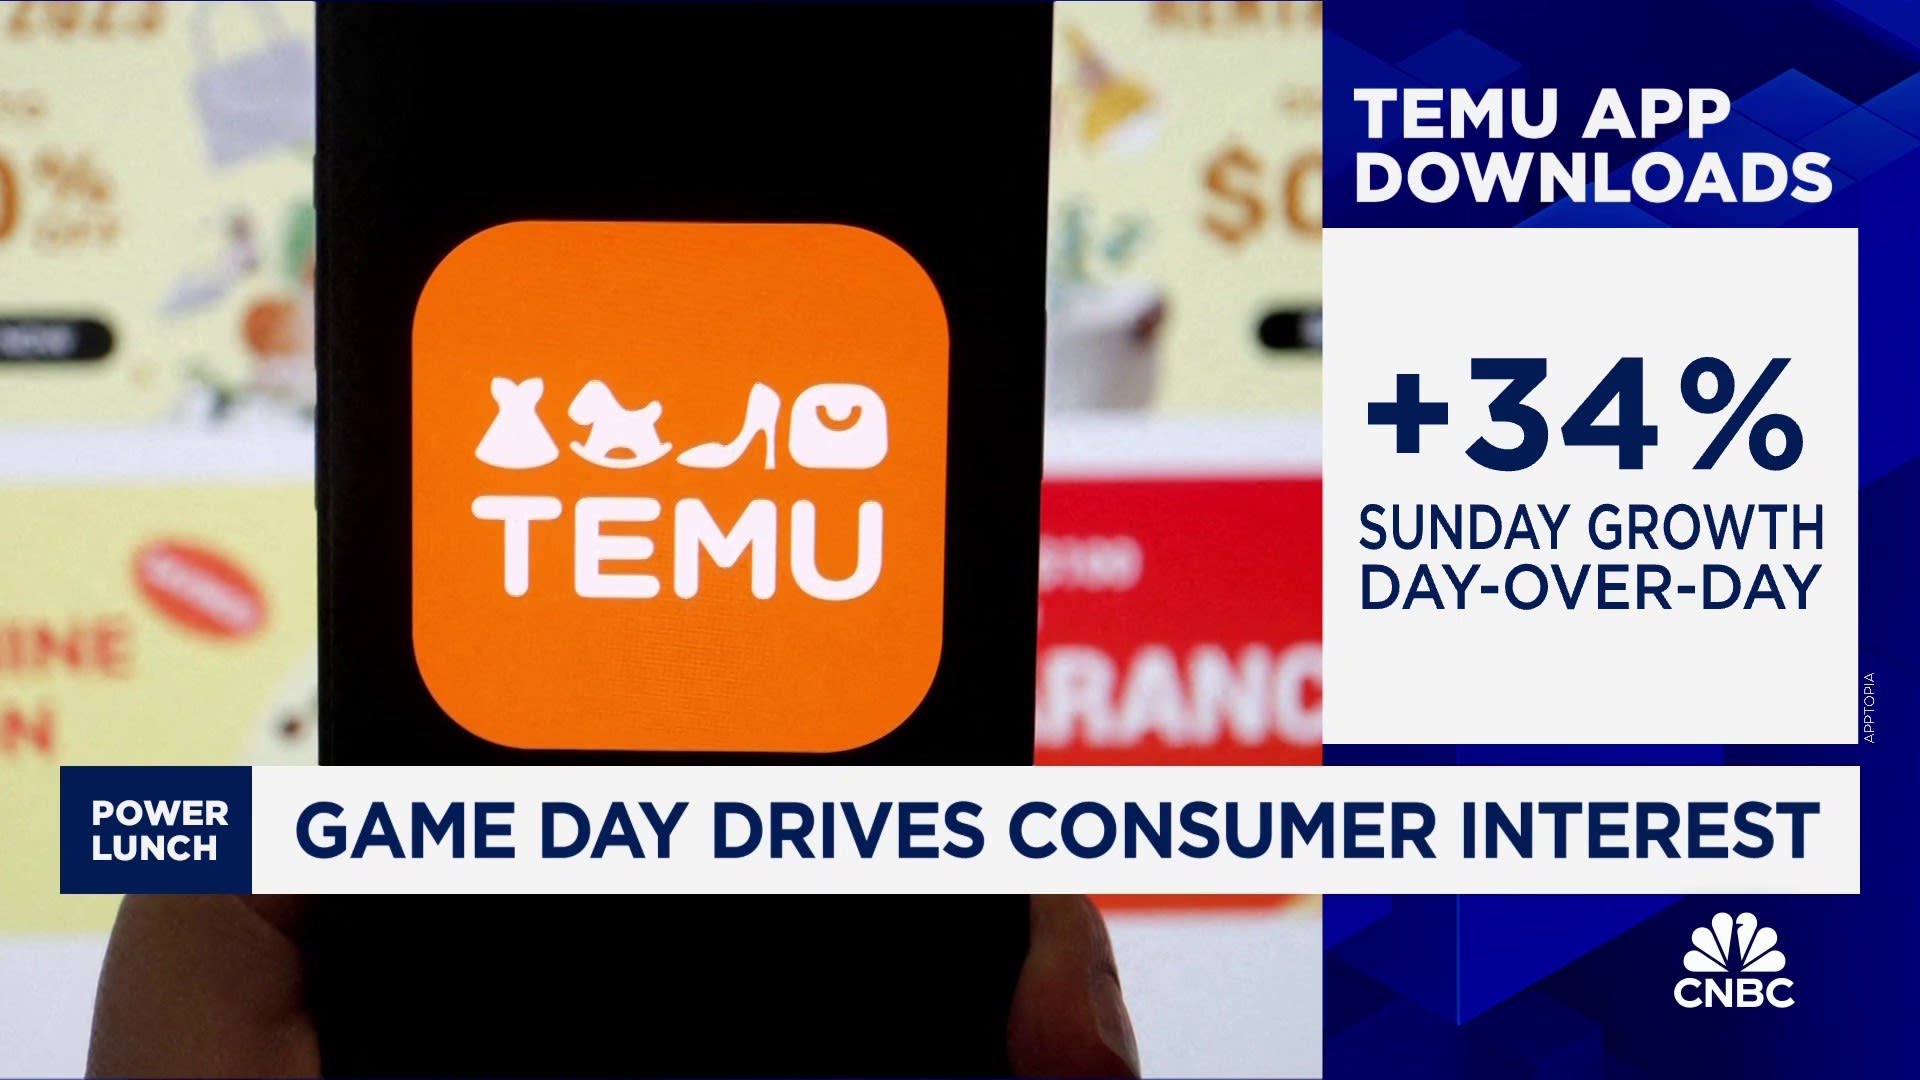 Temu sees fewer new users post Super Bowl compared to last year